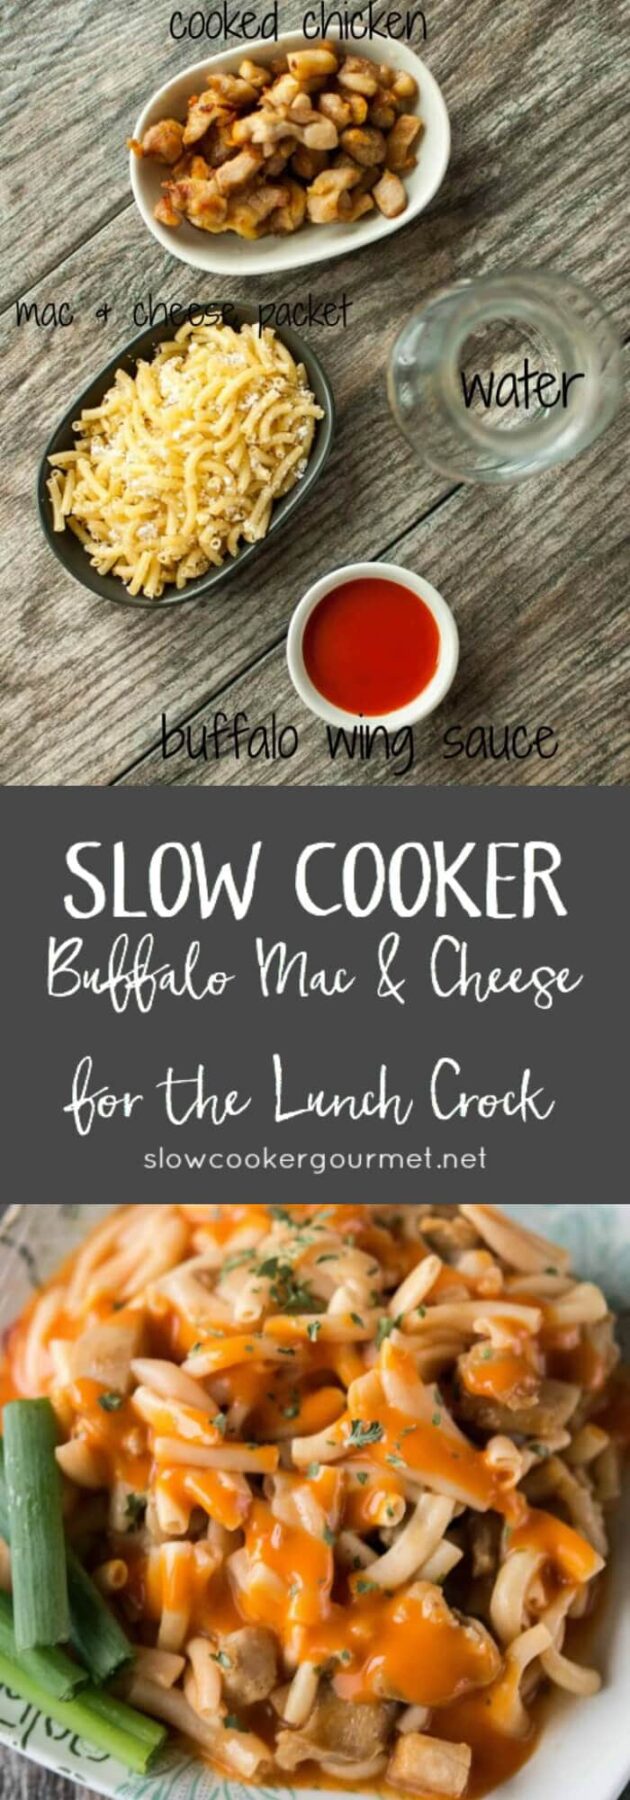 Slow Cooker Buffalo Mac and Cheese for the Lunch Crock